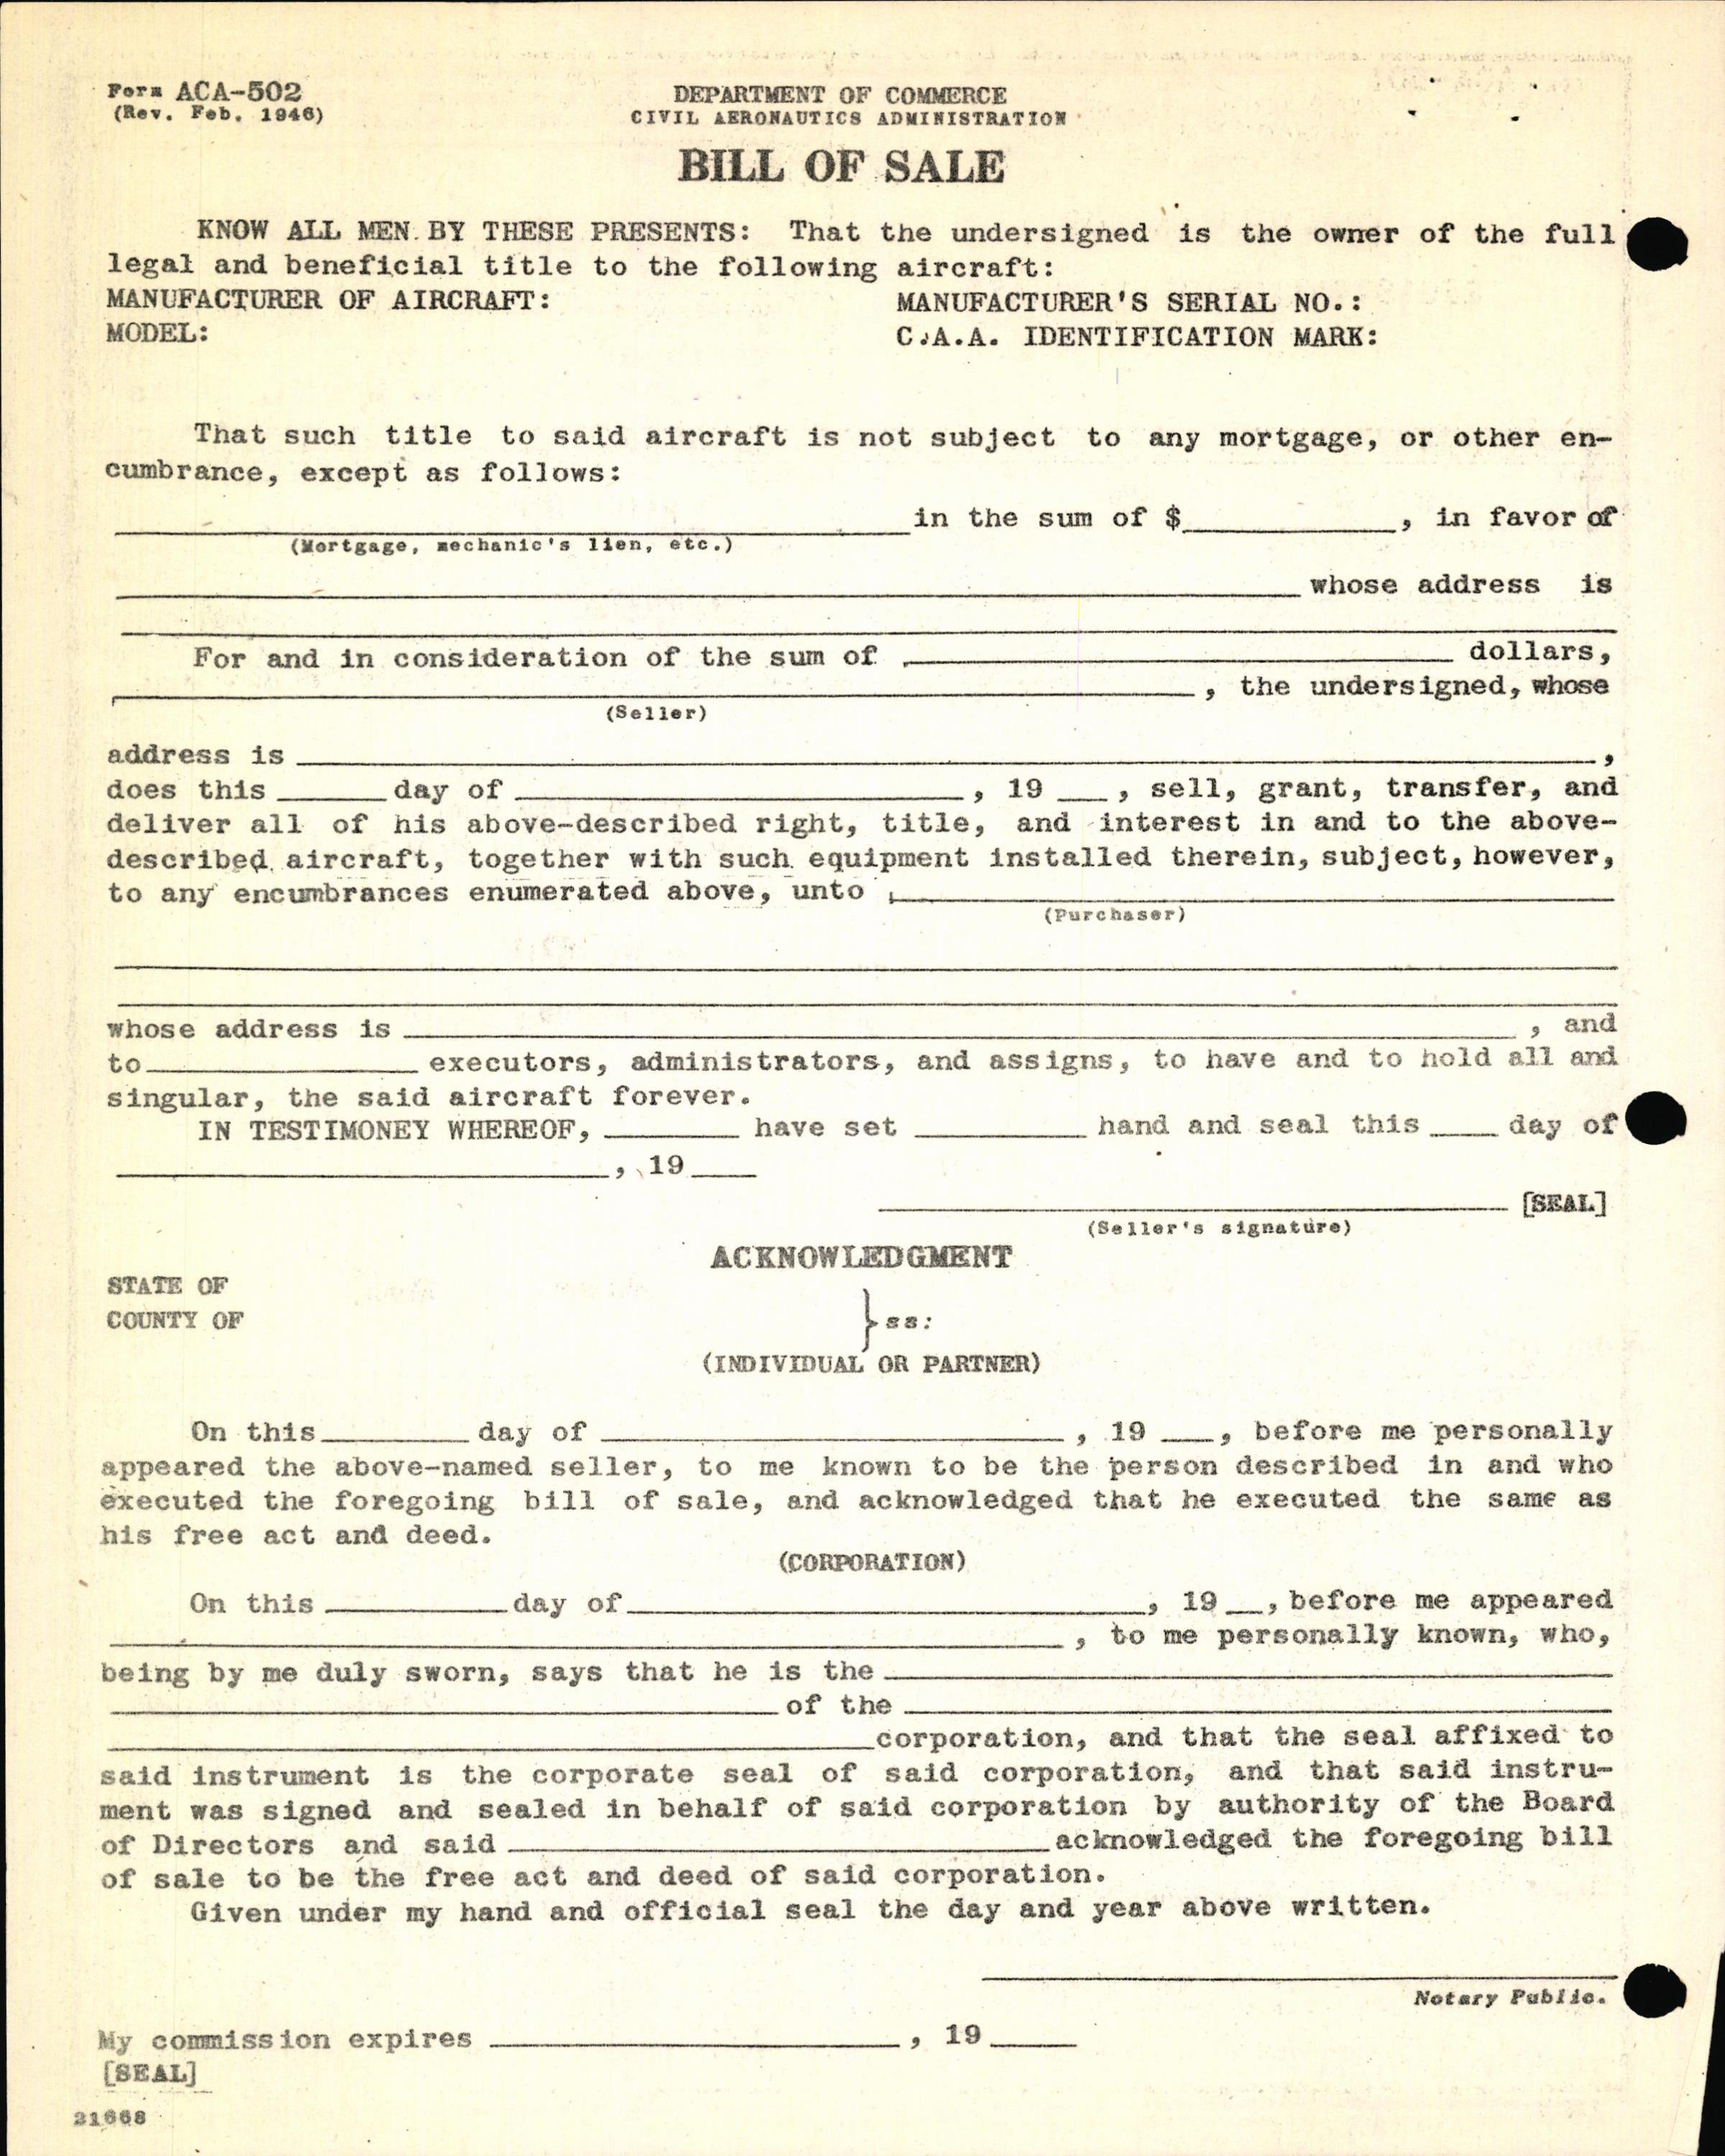 Sample page 4 from AirCorps Library document: Technical Information for Serial Number 1212